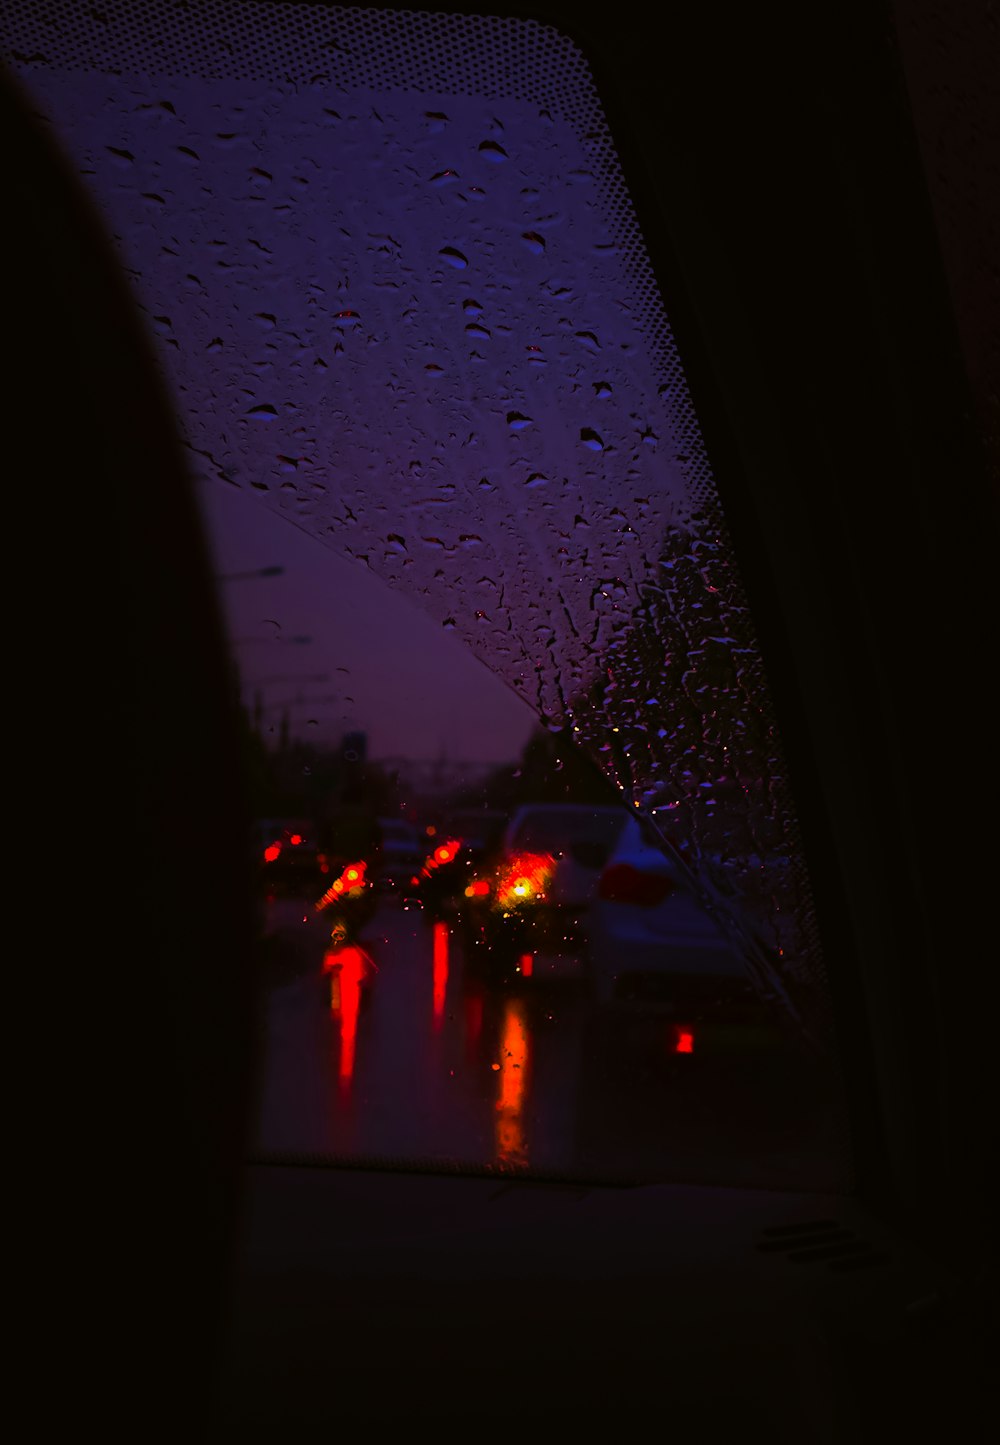 a view of a rain covered windshield at night